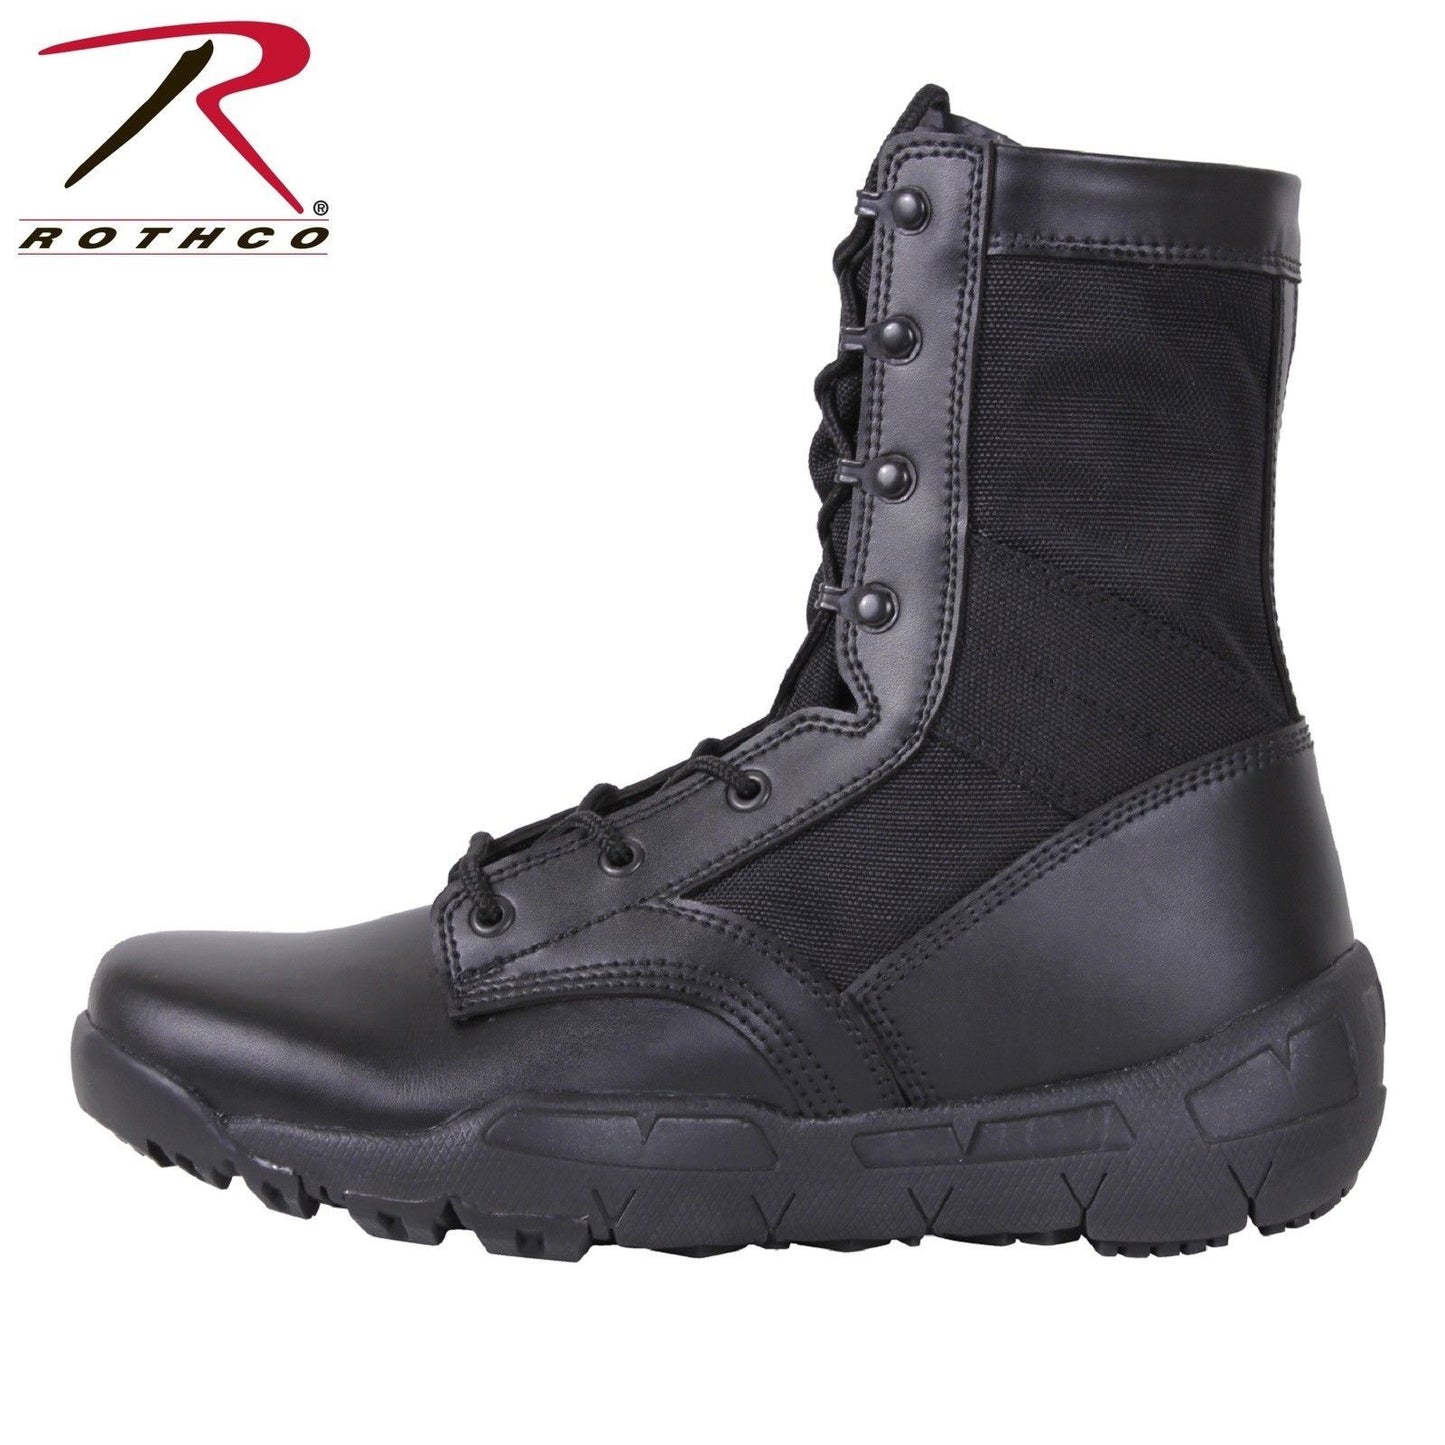 Lightweight V-Max Tactical Boots - Rothco Black 8.5" Field Duty Work Boot